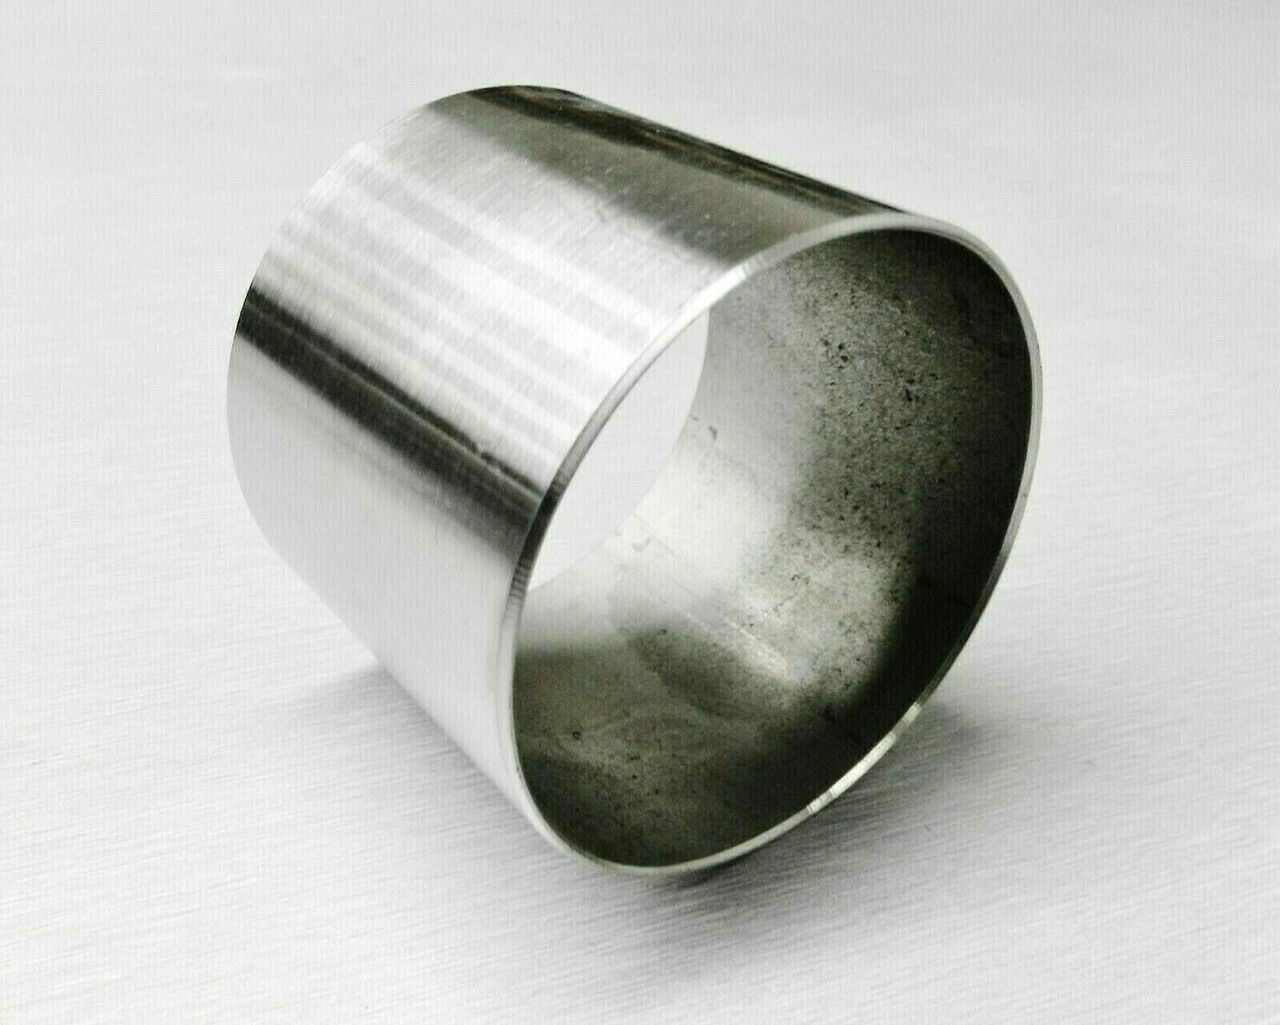 Flask 3" x 3" Centrifugal Casting Ring Stainless Steel Jewelry Casting Made USA